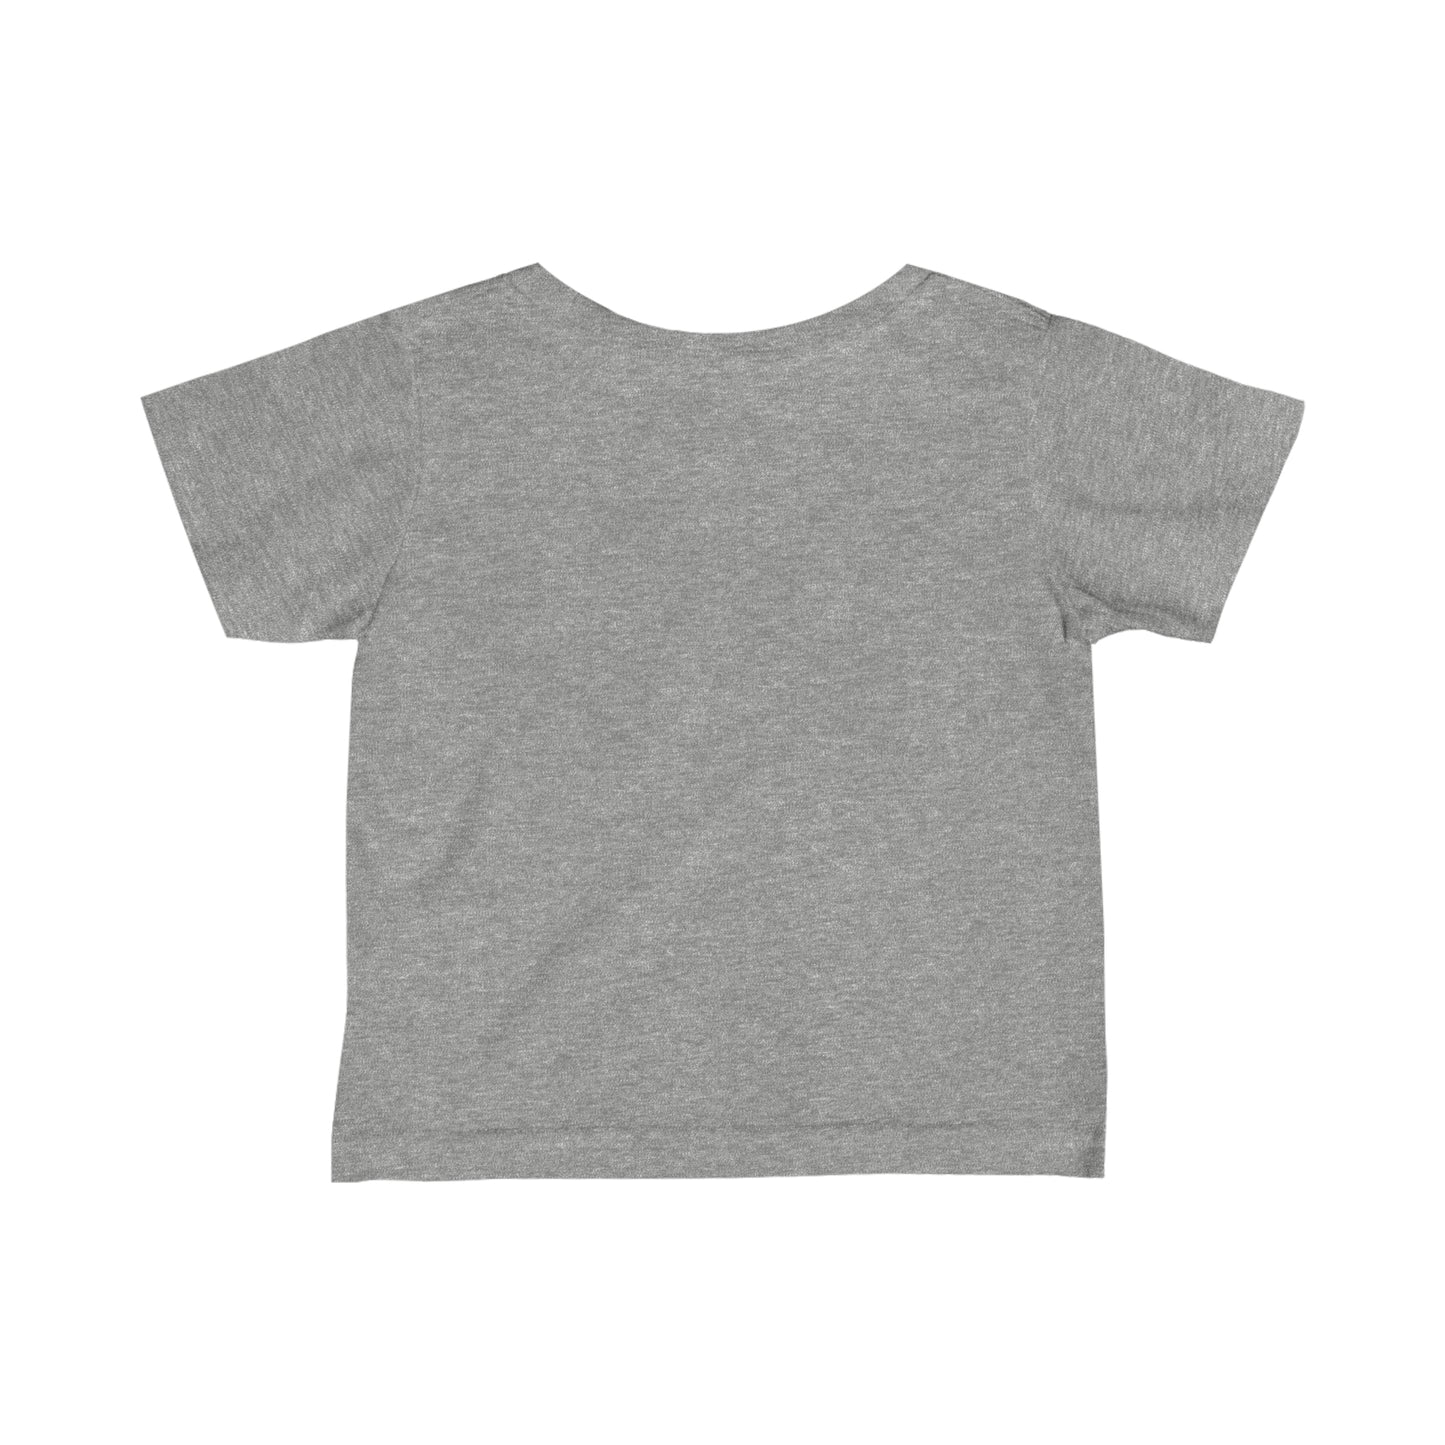 The Daydreamer Infant Tee